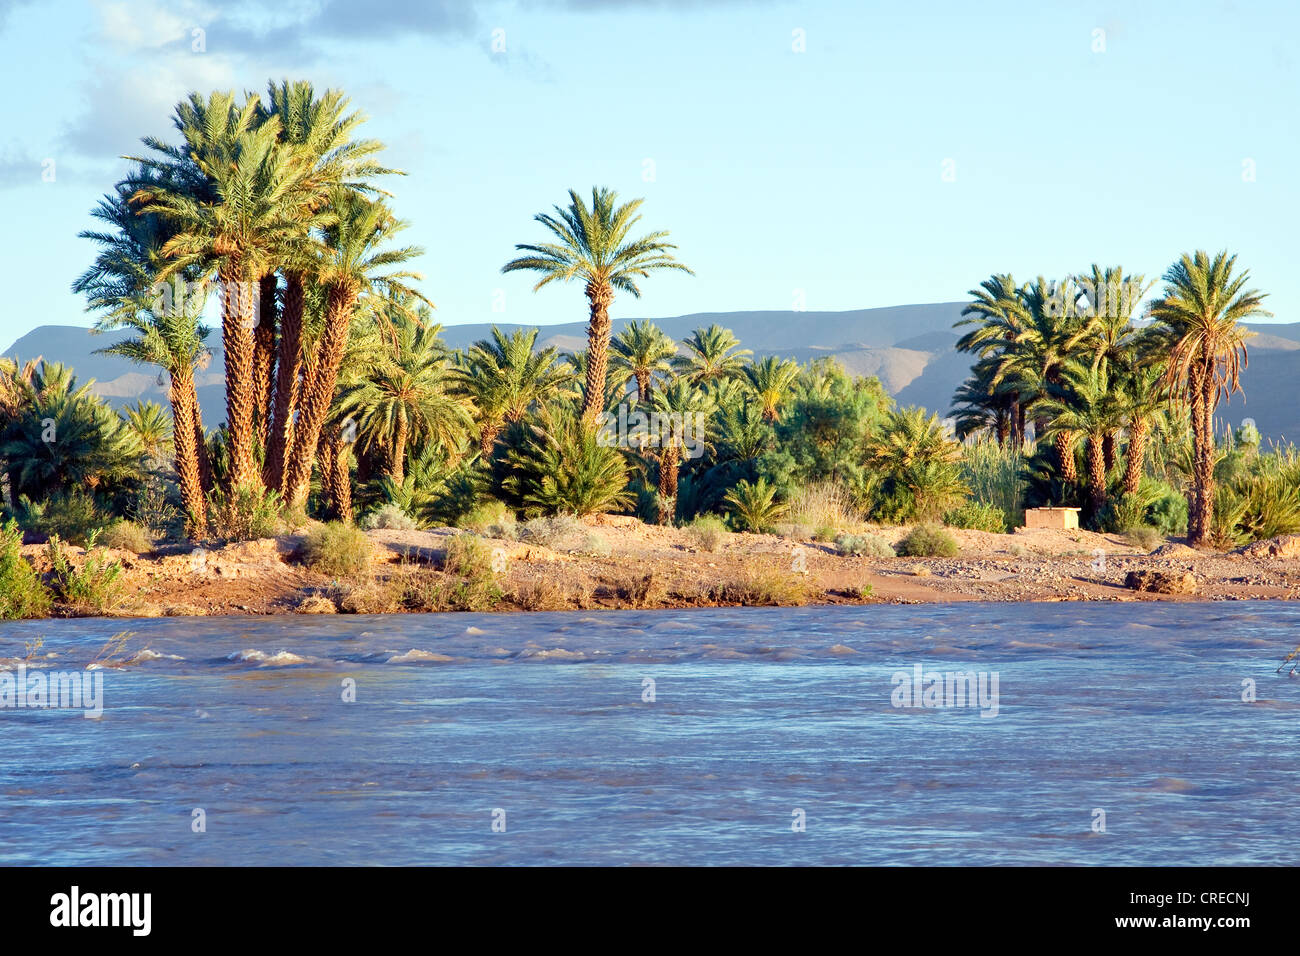 Palm trees on the riverbank of the Draa River, Draa valley, Agdz, Morocco, Africa Stock Photo